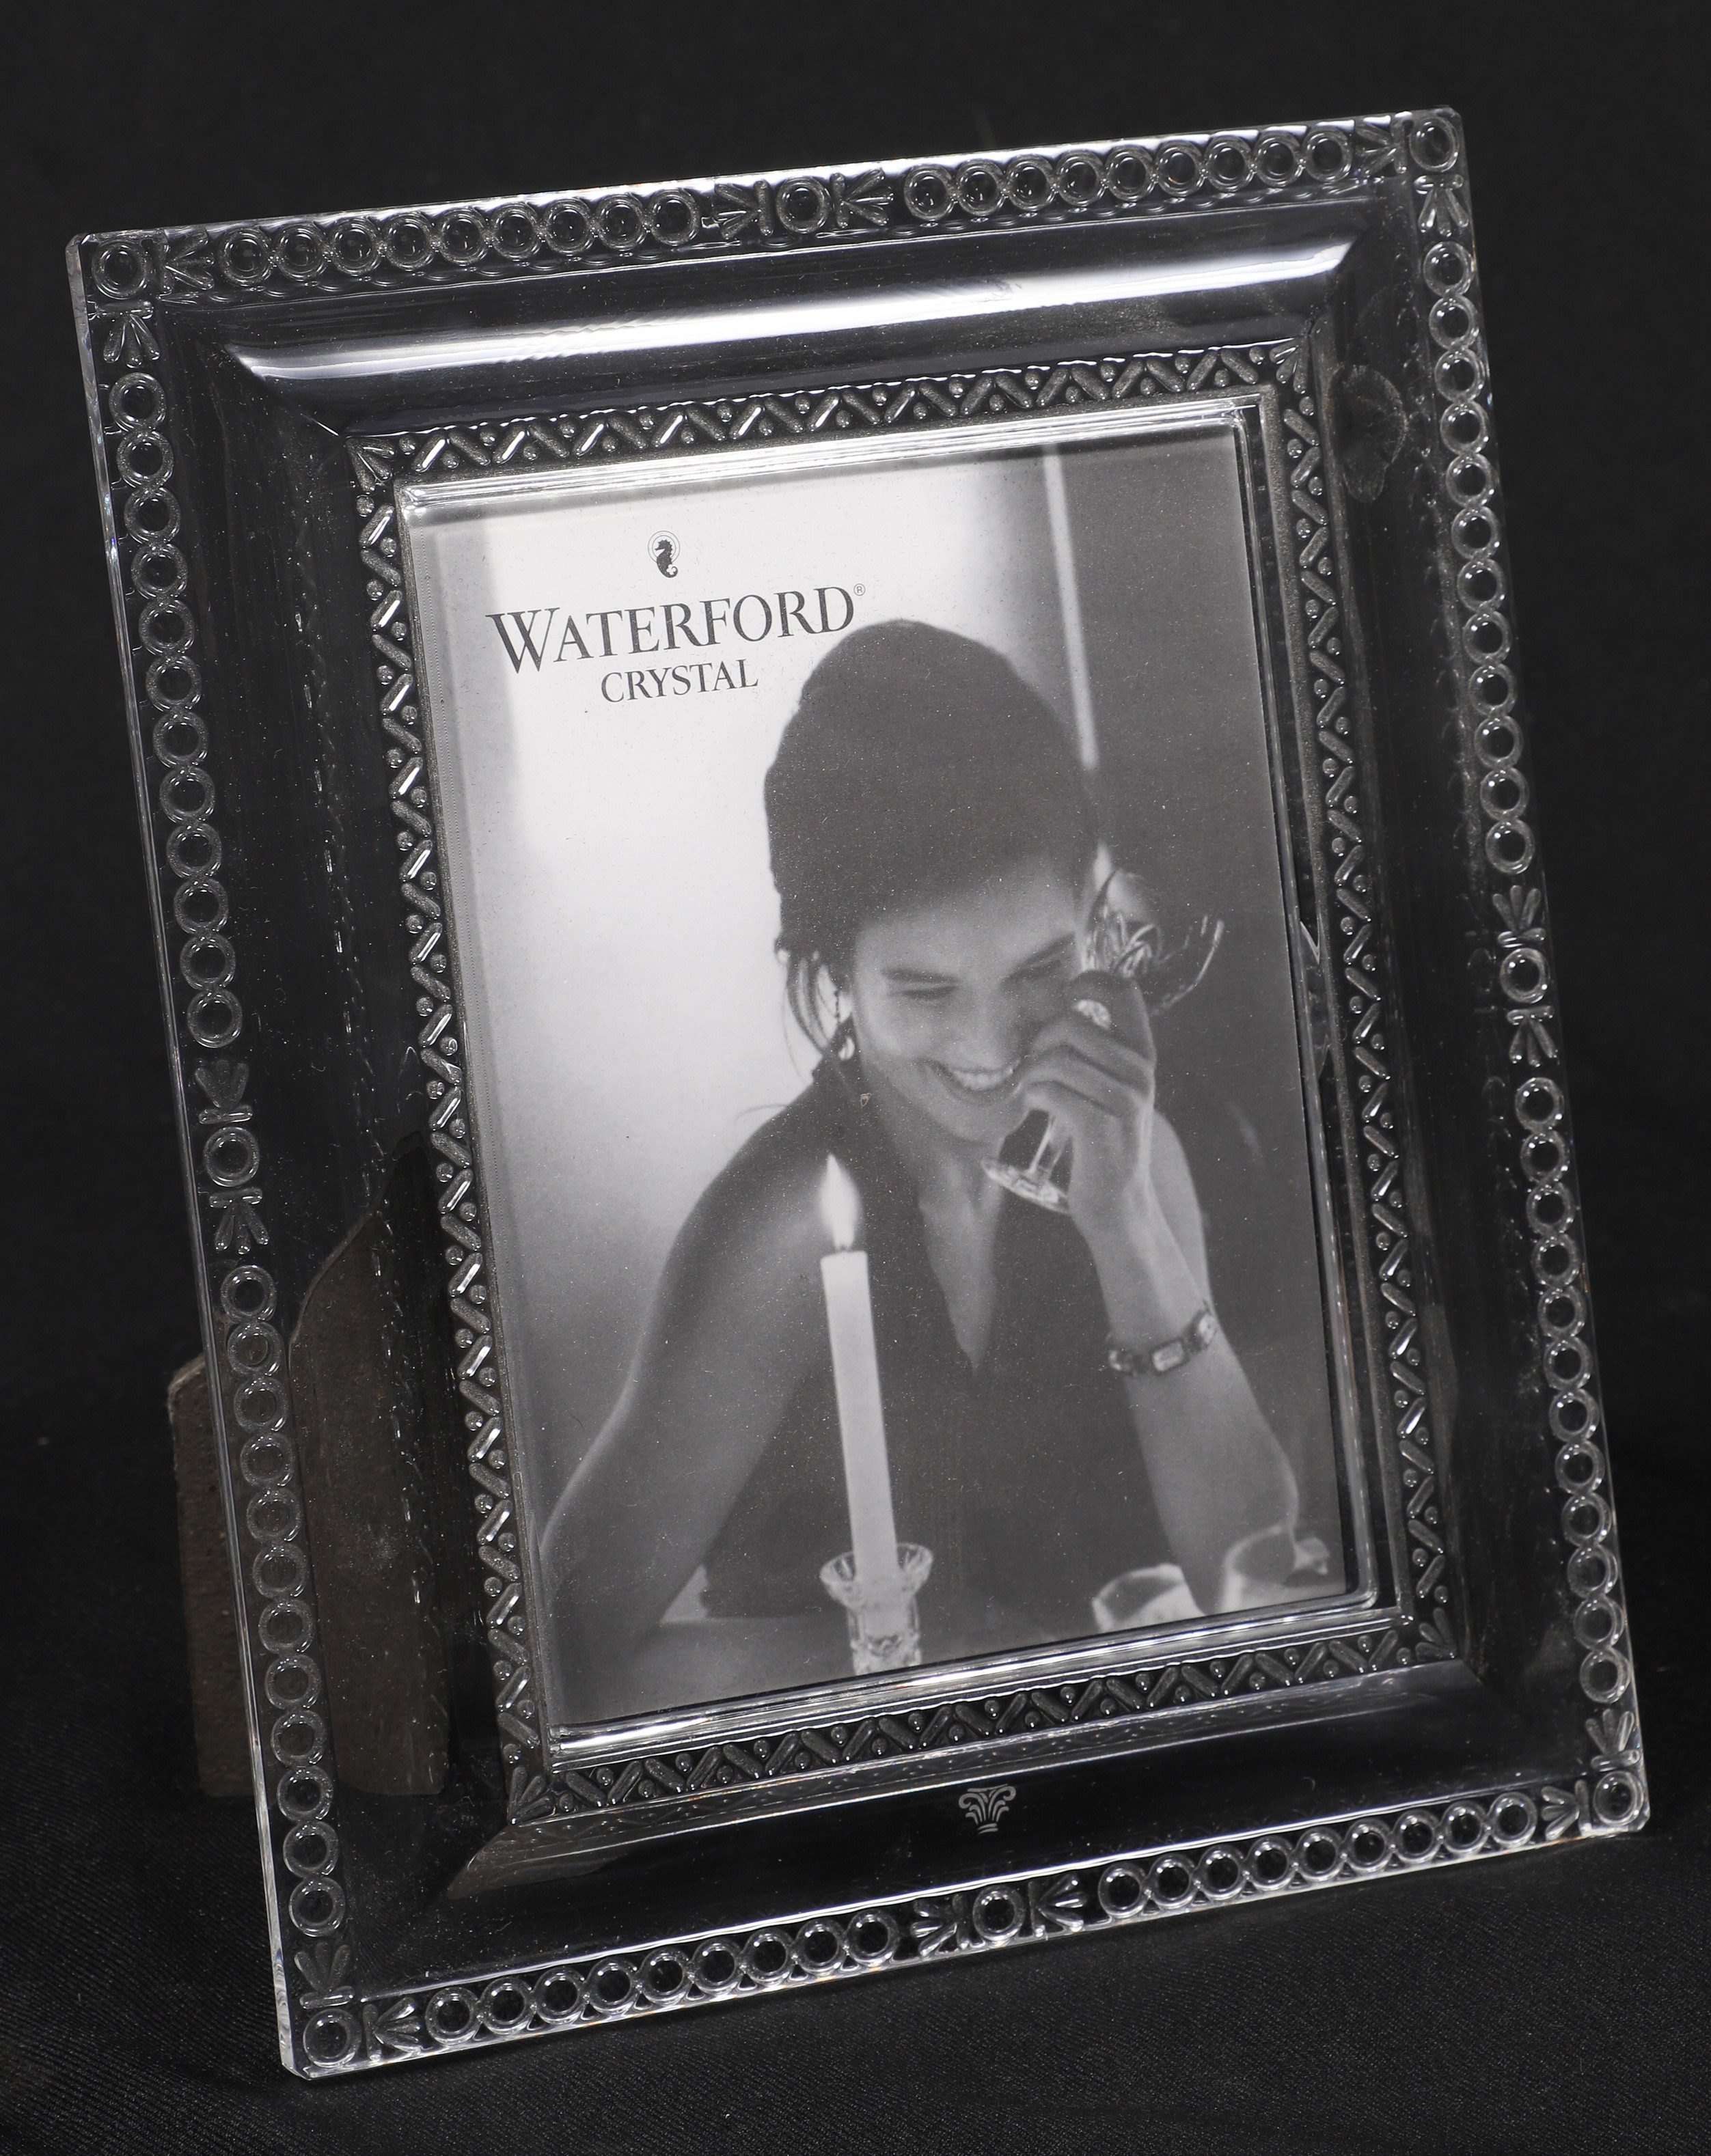 Waterford crystal picture frame  2e15db